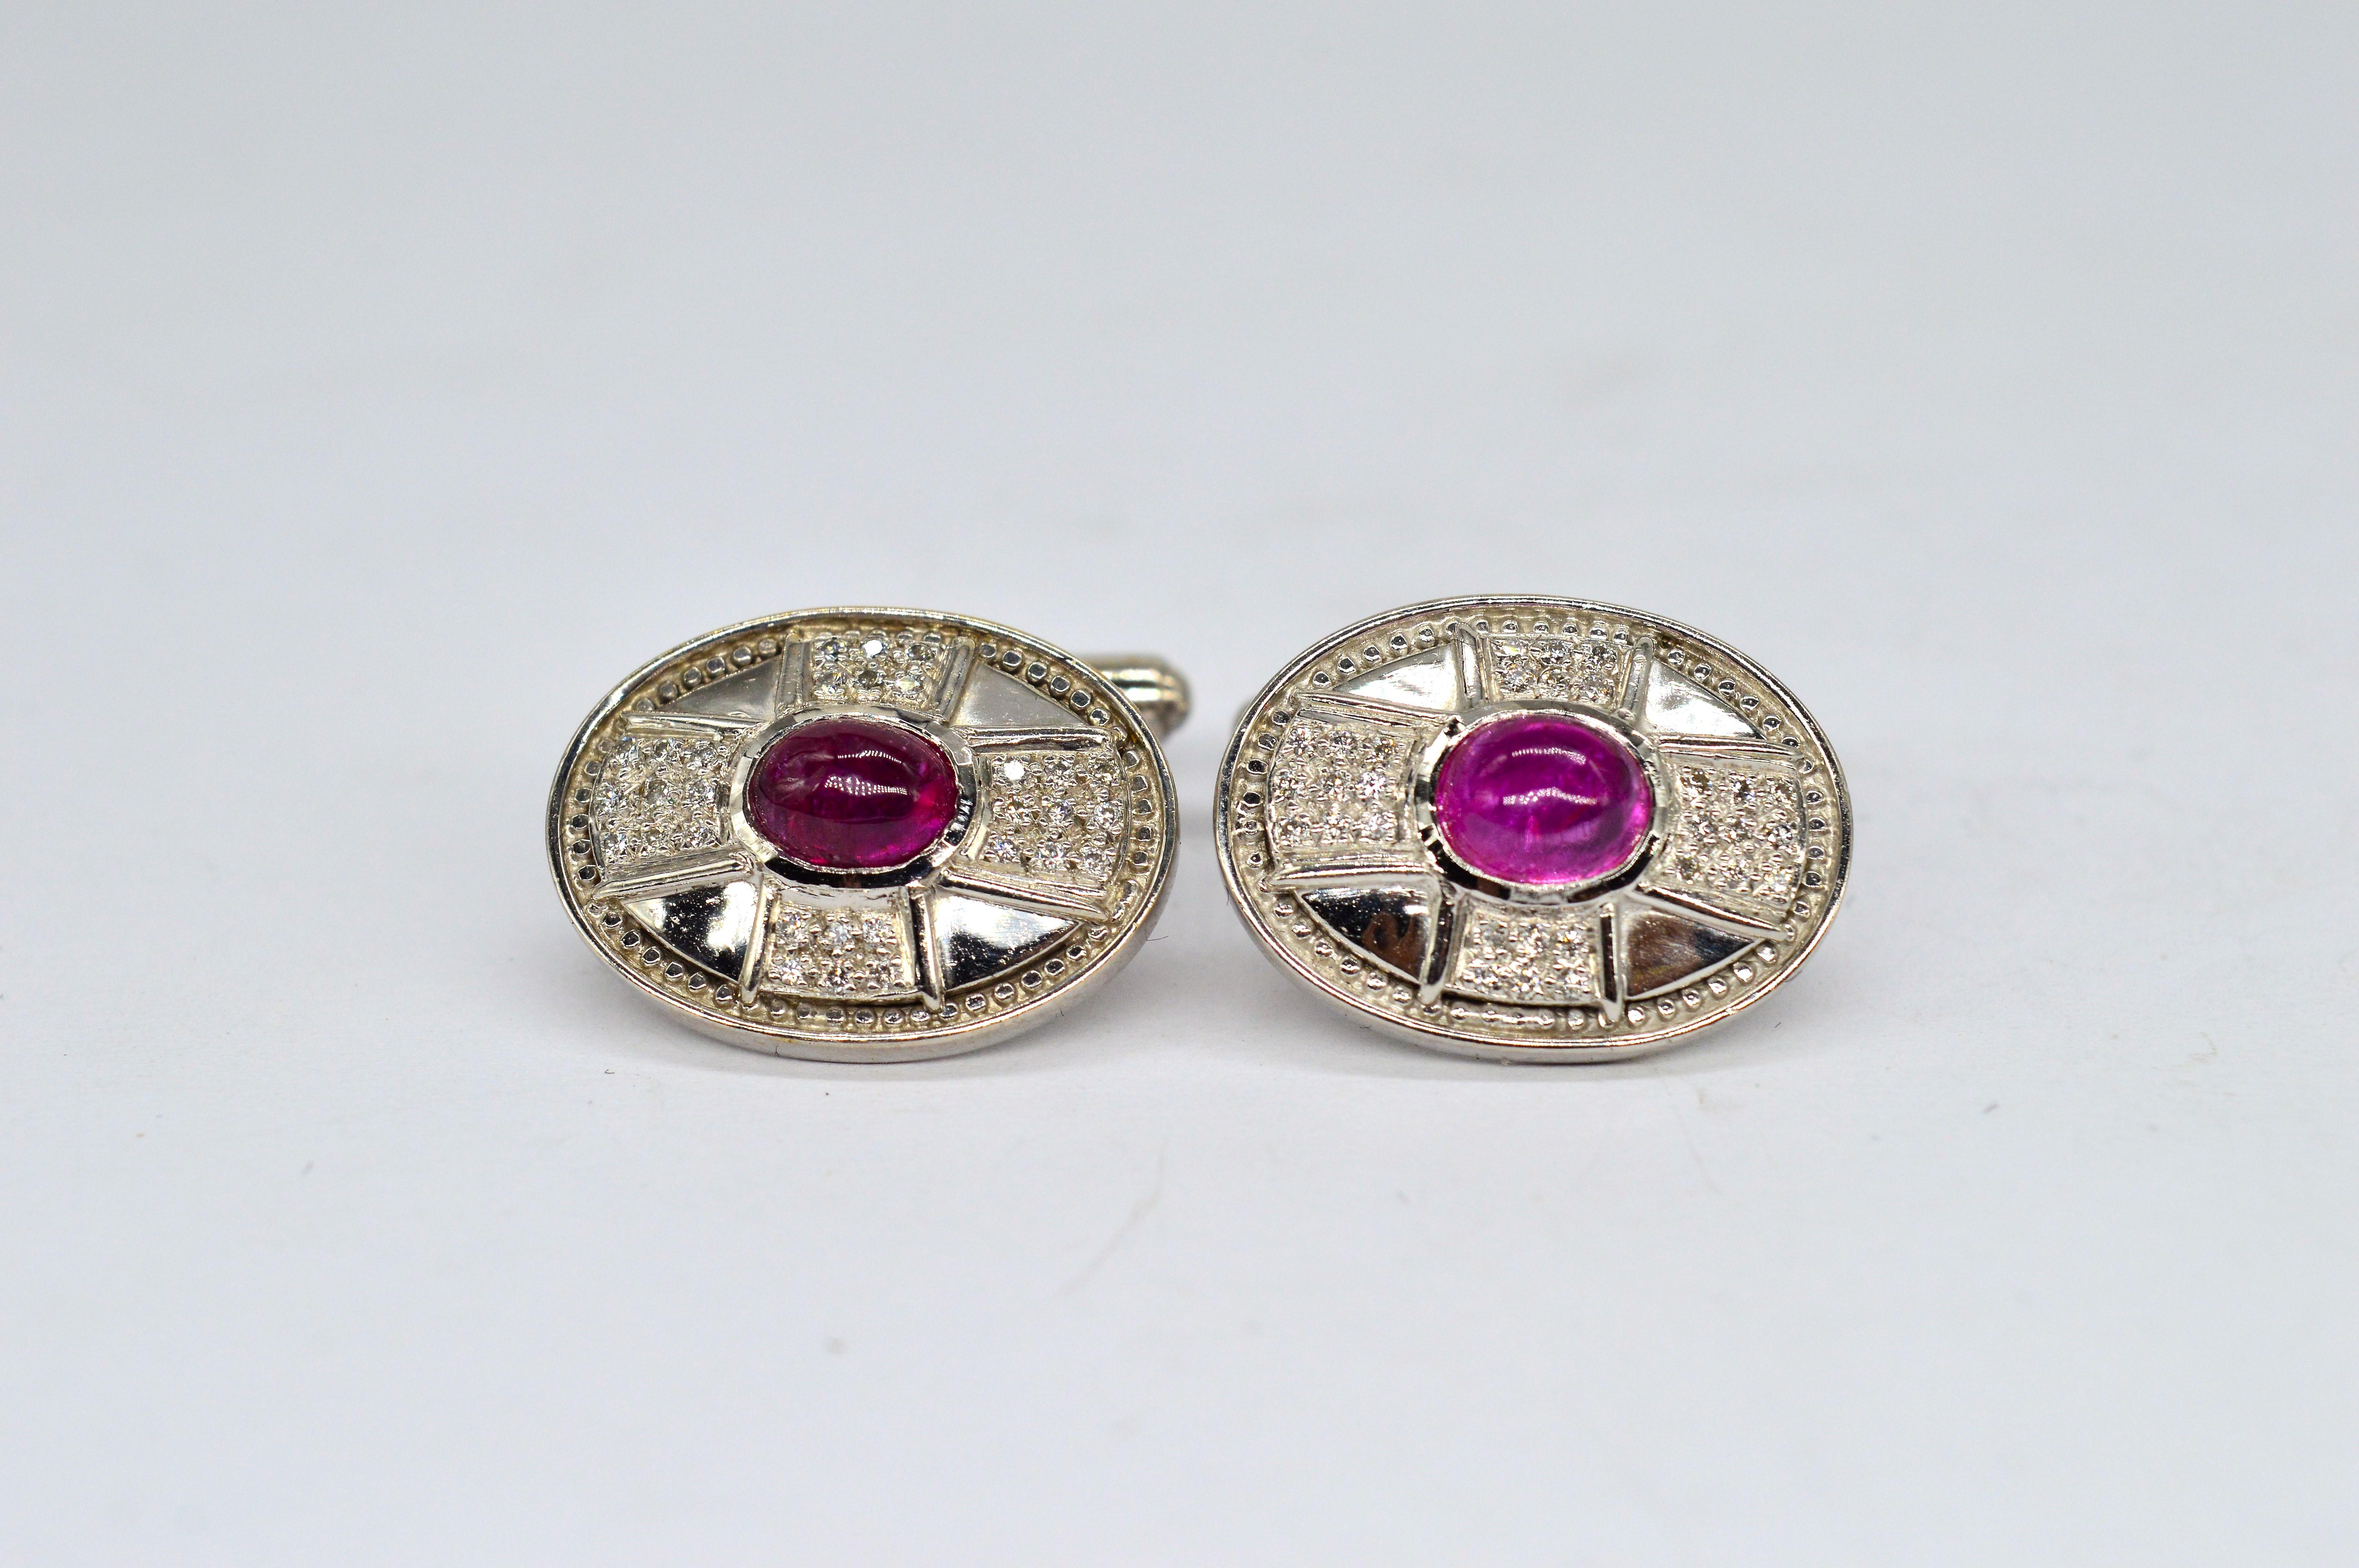 A set of 18ct White gold Diamond and Ruby cufflinks made by Theo Fennel

Crafted using the finest stones available, Theo Fennel's work is known as some of the best there is.

16.39g

We have sold to the set of Hit shows like Peaky Blinders and